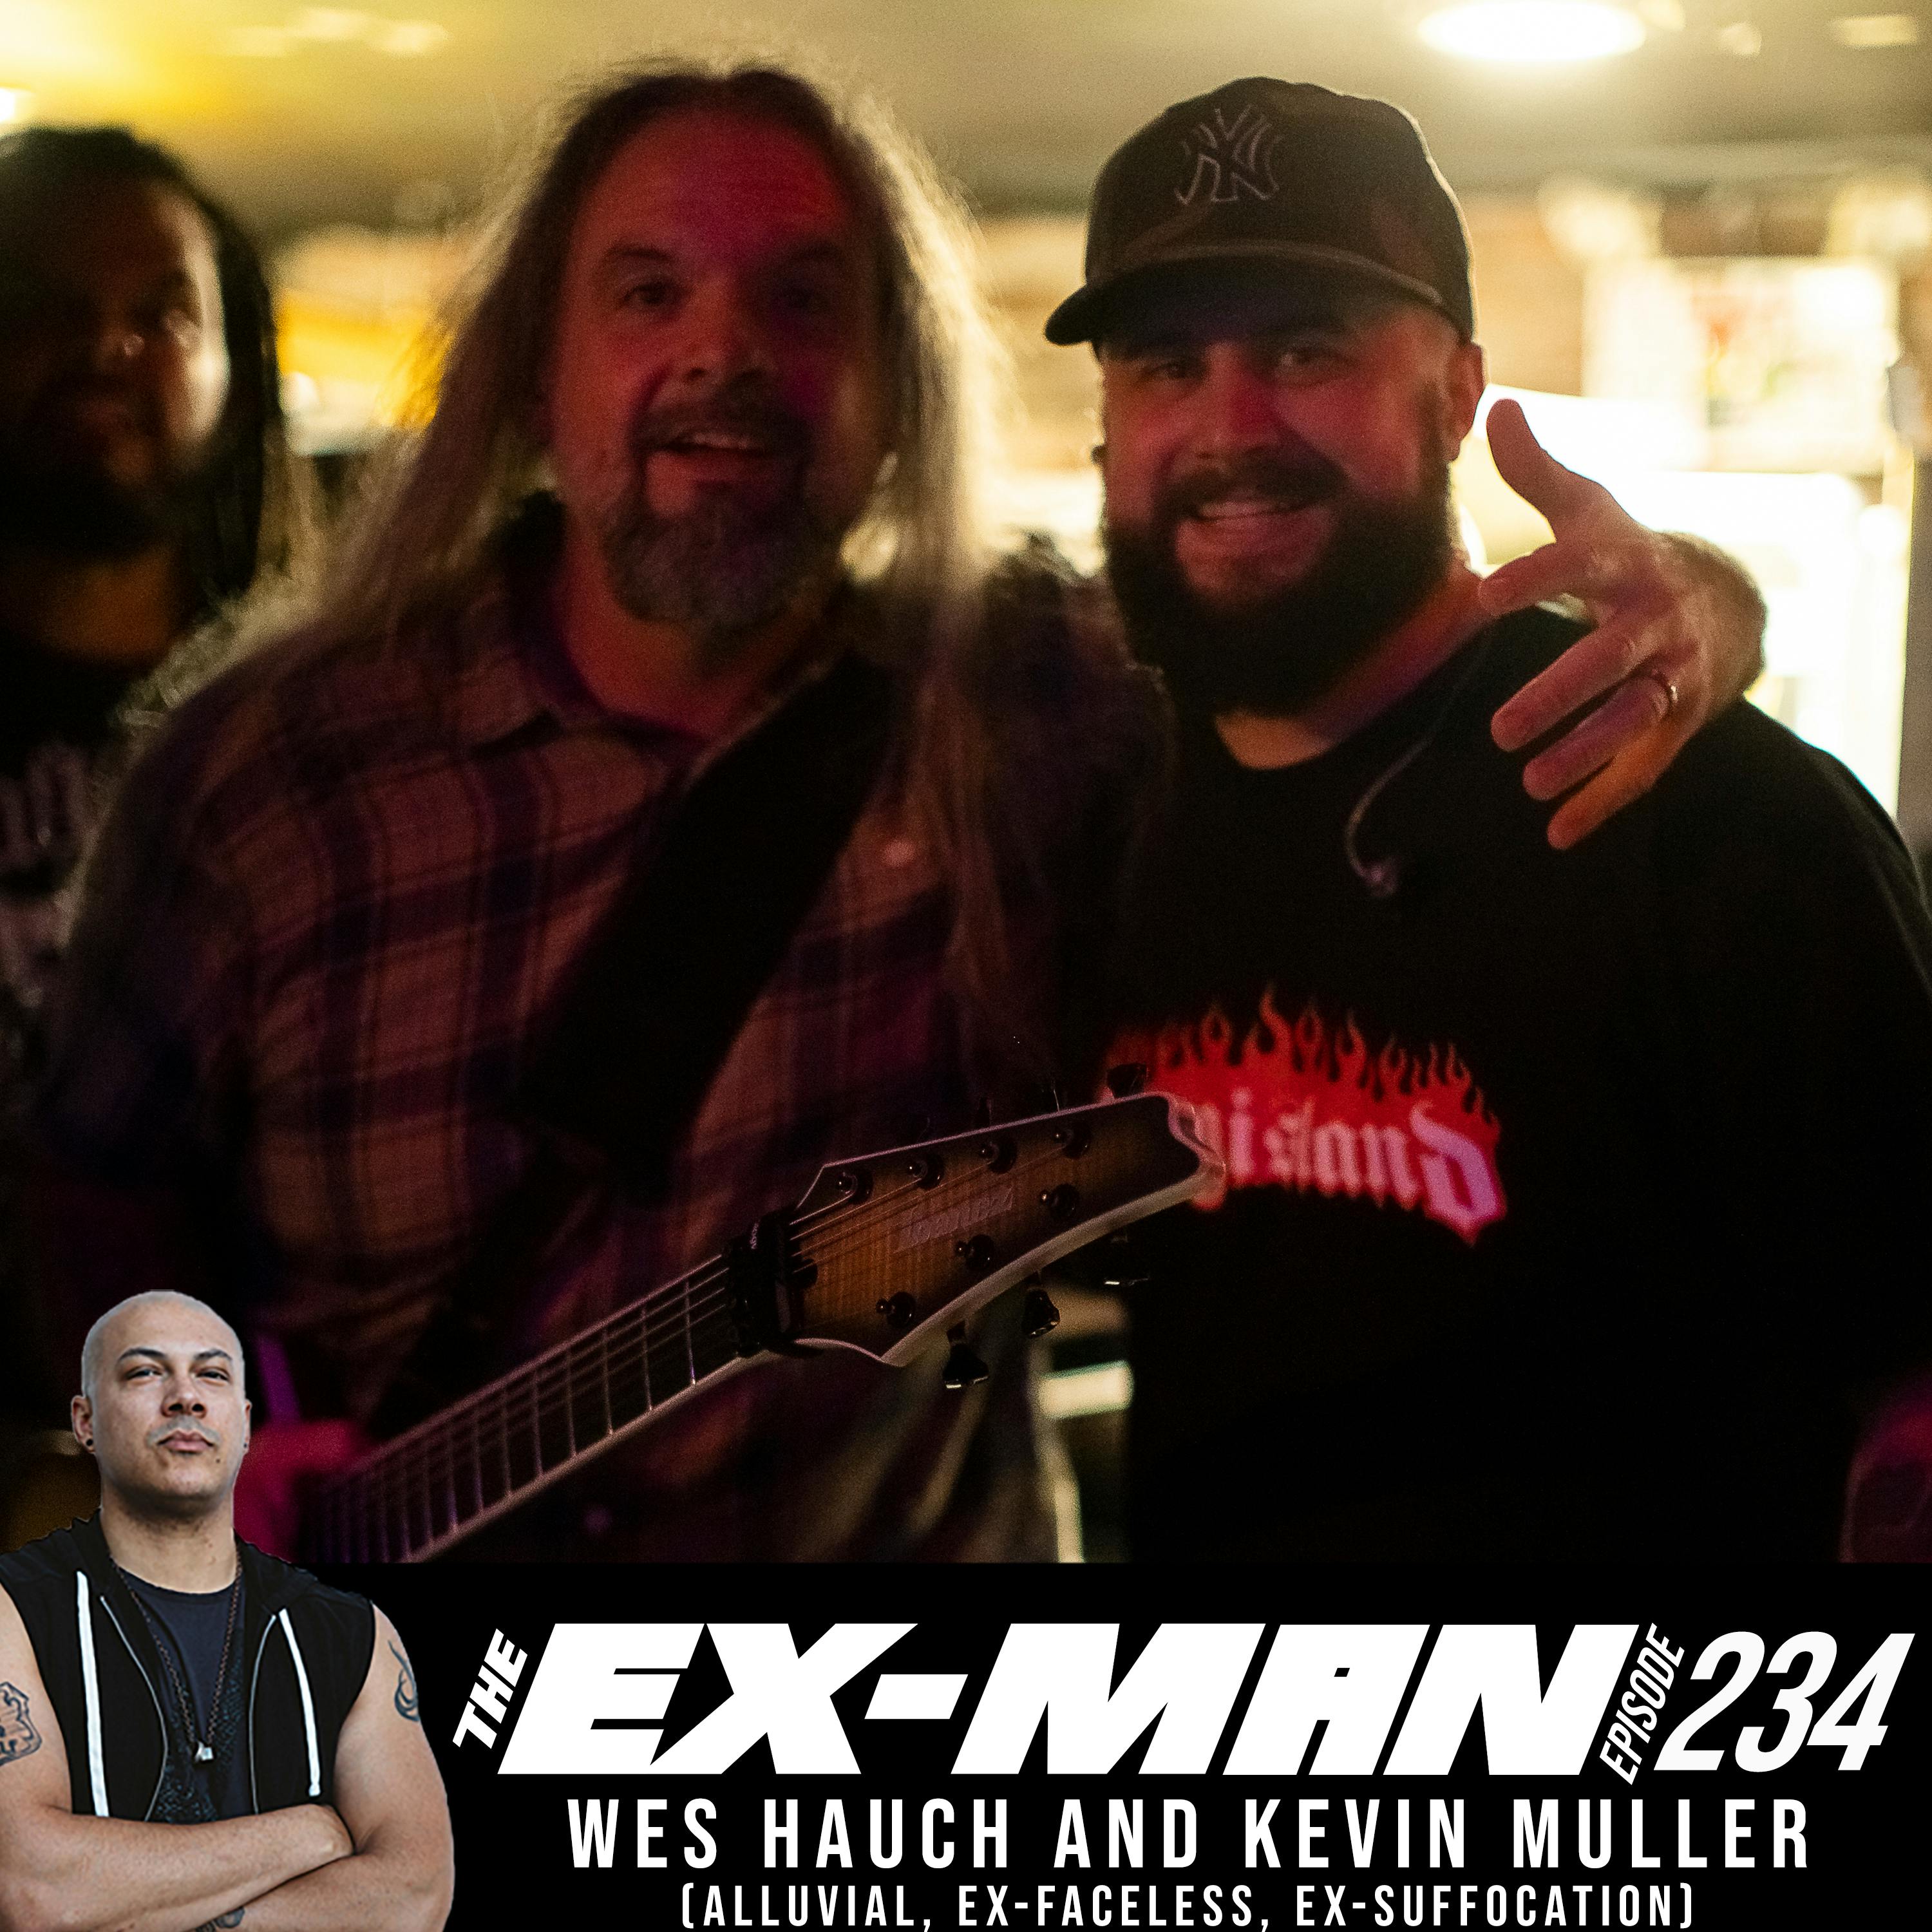 Wes Hauch (Alluvial, ex-Faceless) and Kevin Muller (Alluvial,ex-Suffocation)